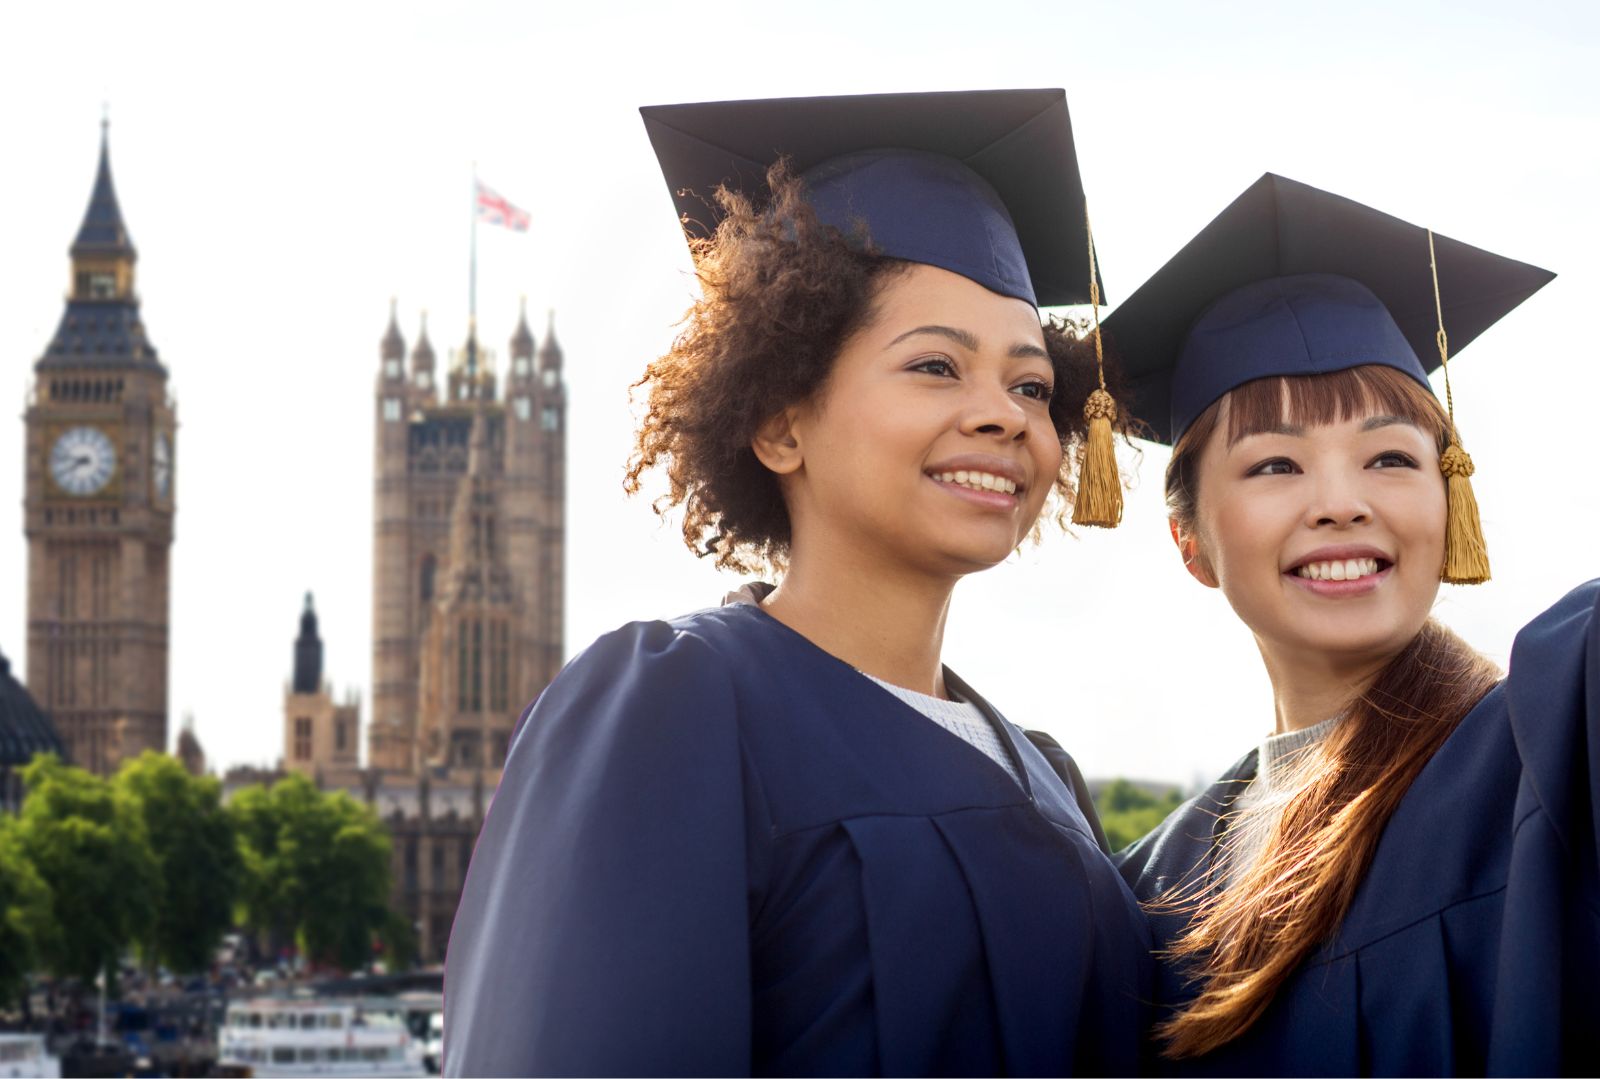 UK students graduating who might want to attest degree certificate